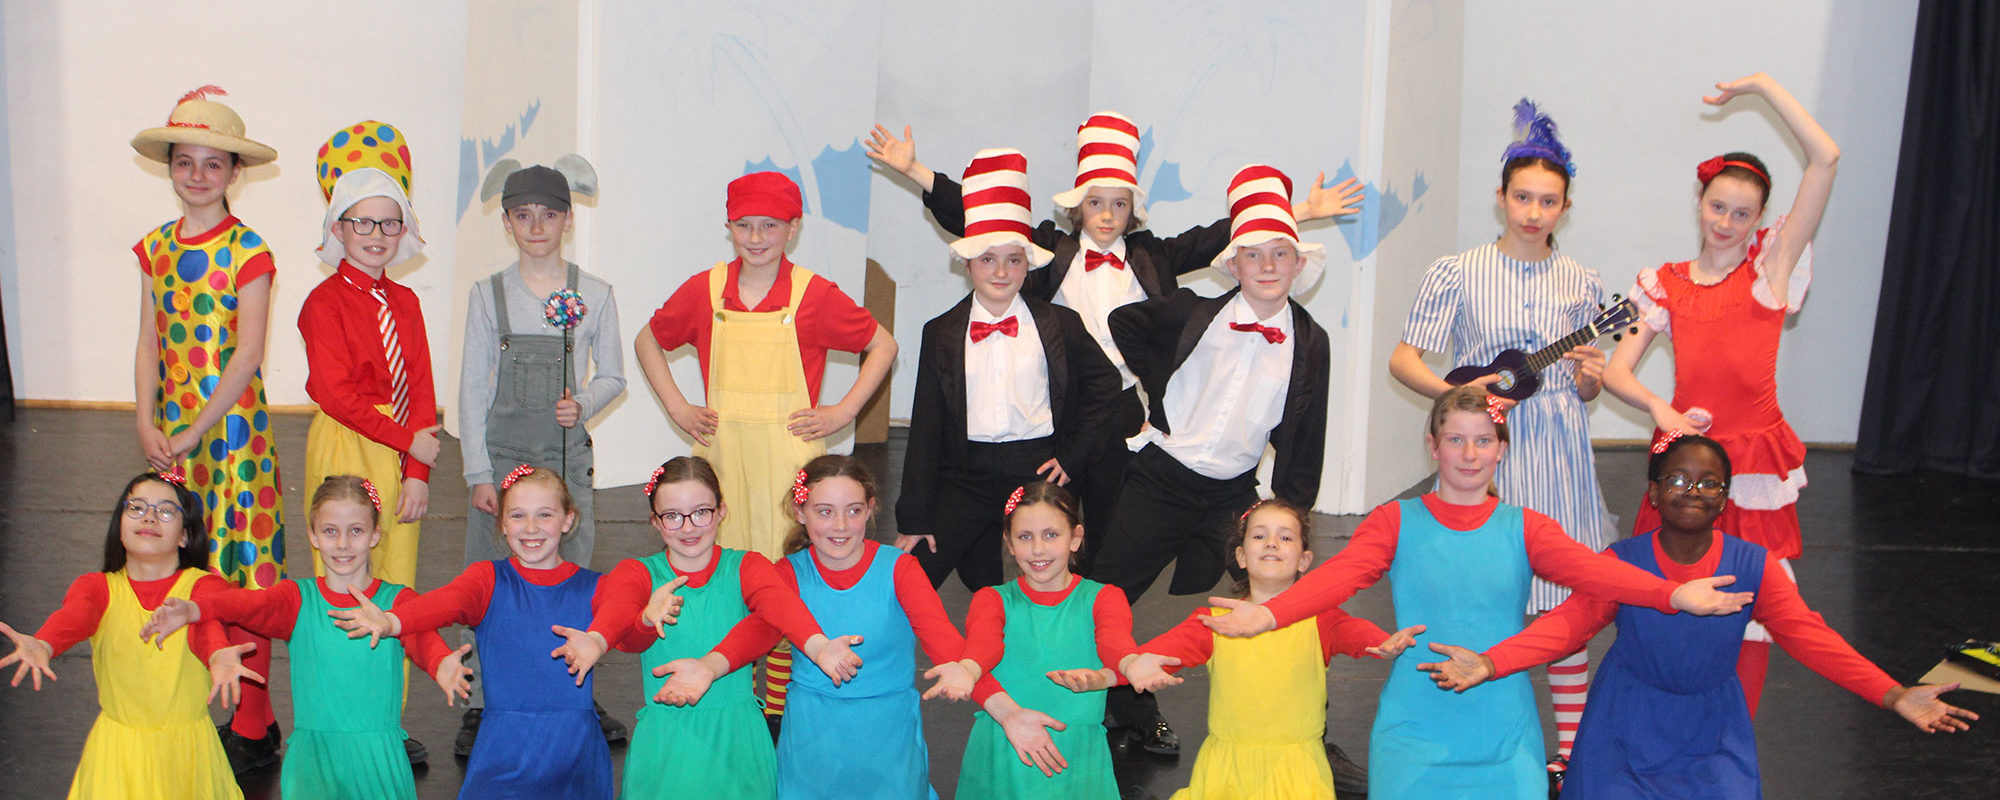 Wycliffe students in costumes